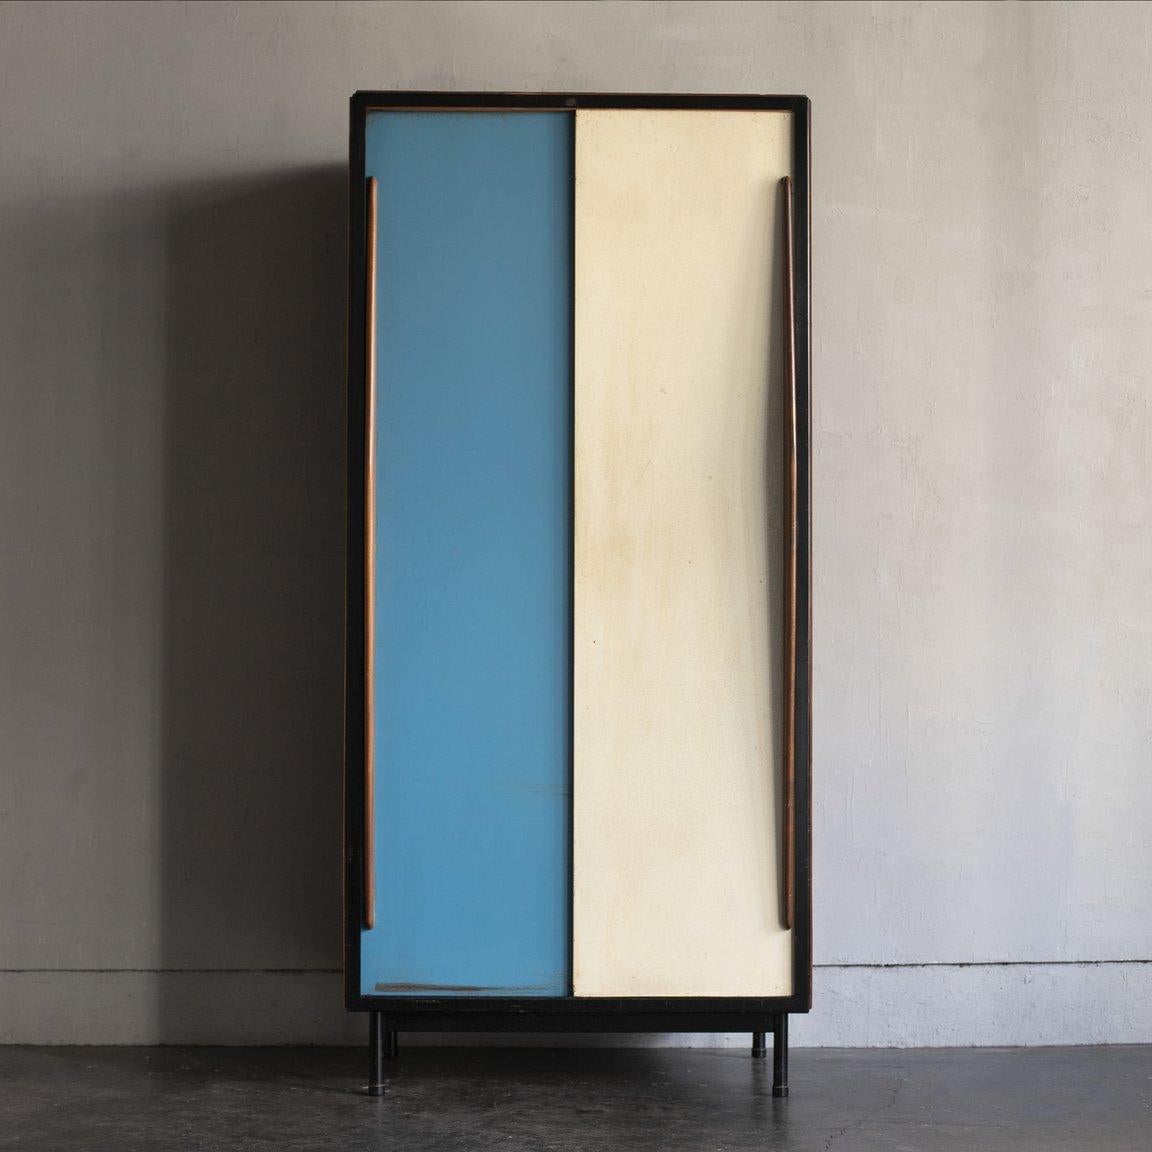 Circa 1950s / Belgium
Size W805 D540 H1750 mm

This wardrobe was designed by Belgian designer Willy Van Da Meeren and dates from the 1950s. The doors are made of steel painted in bright blue and white with wooden handles, typical of Belgian